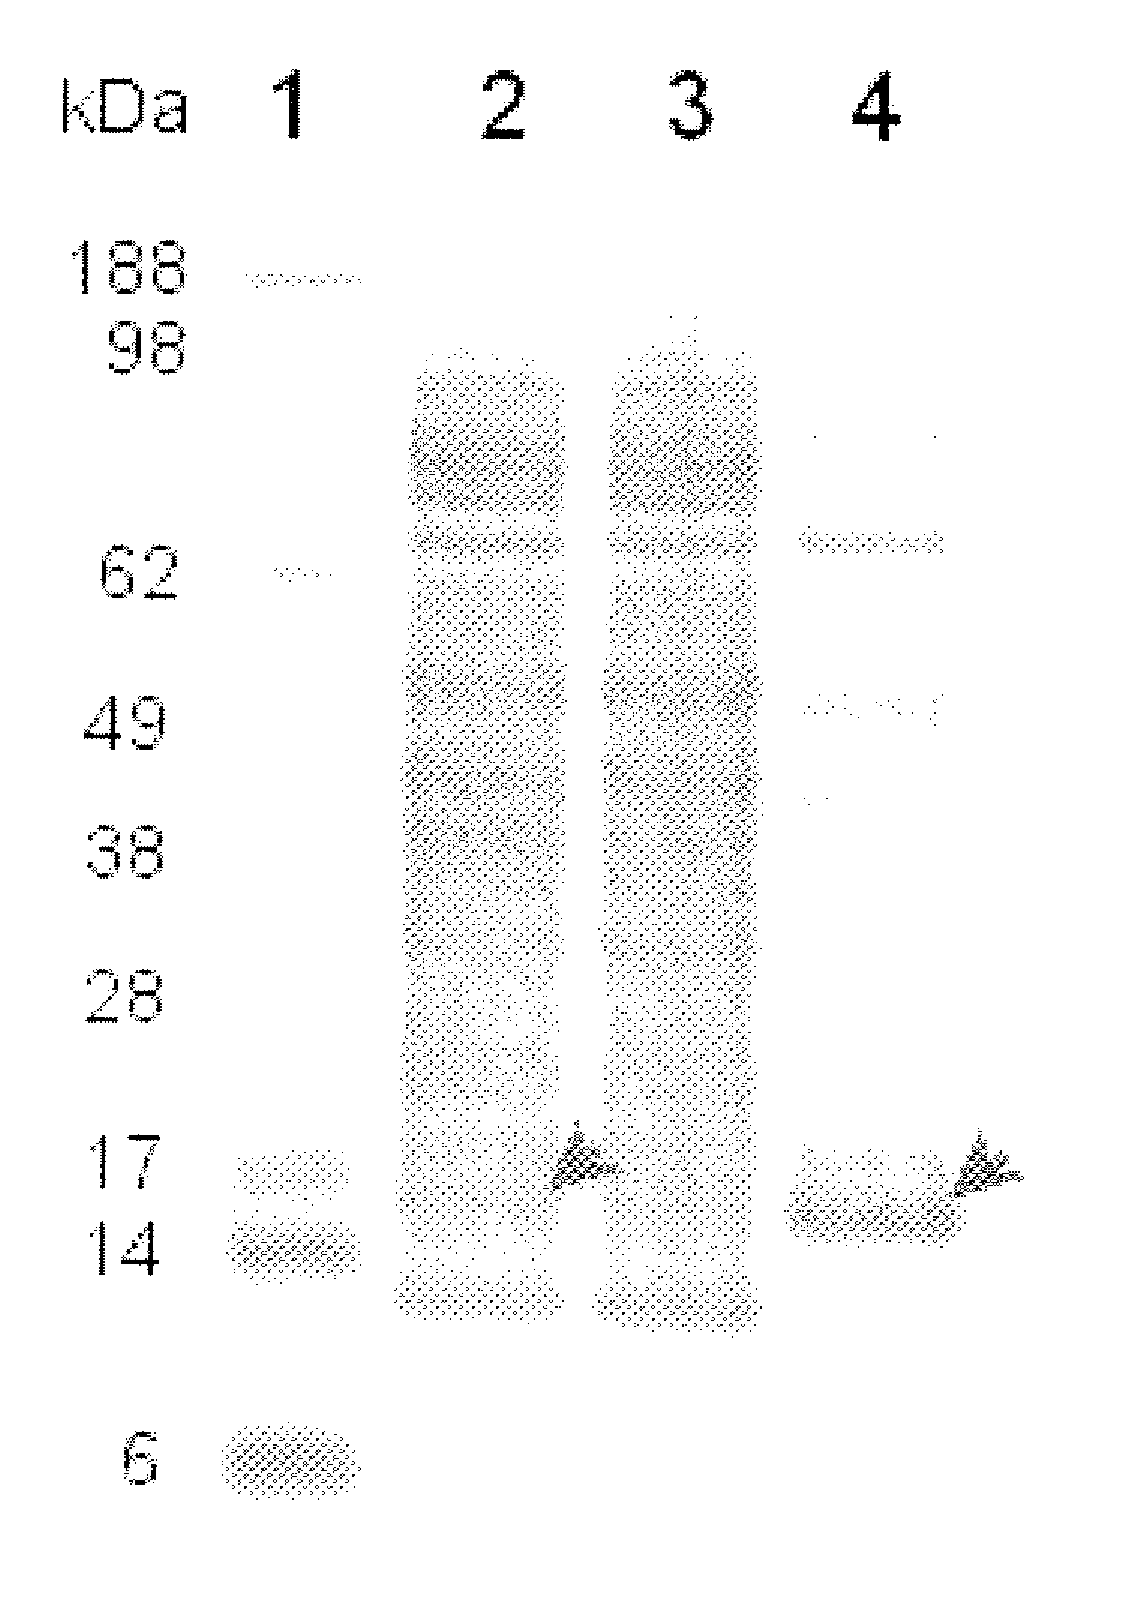 Canine Thymic Stromal Lymphopoietin Protein and Uses Thereof